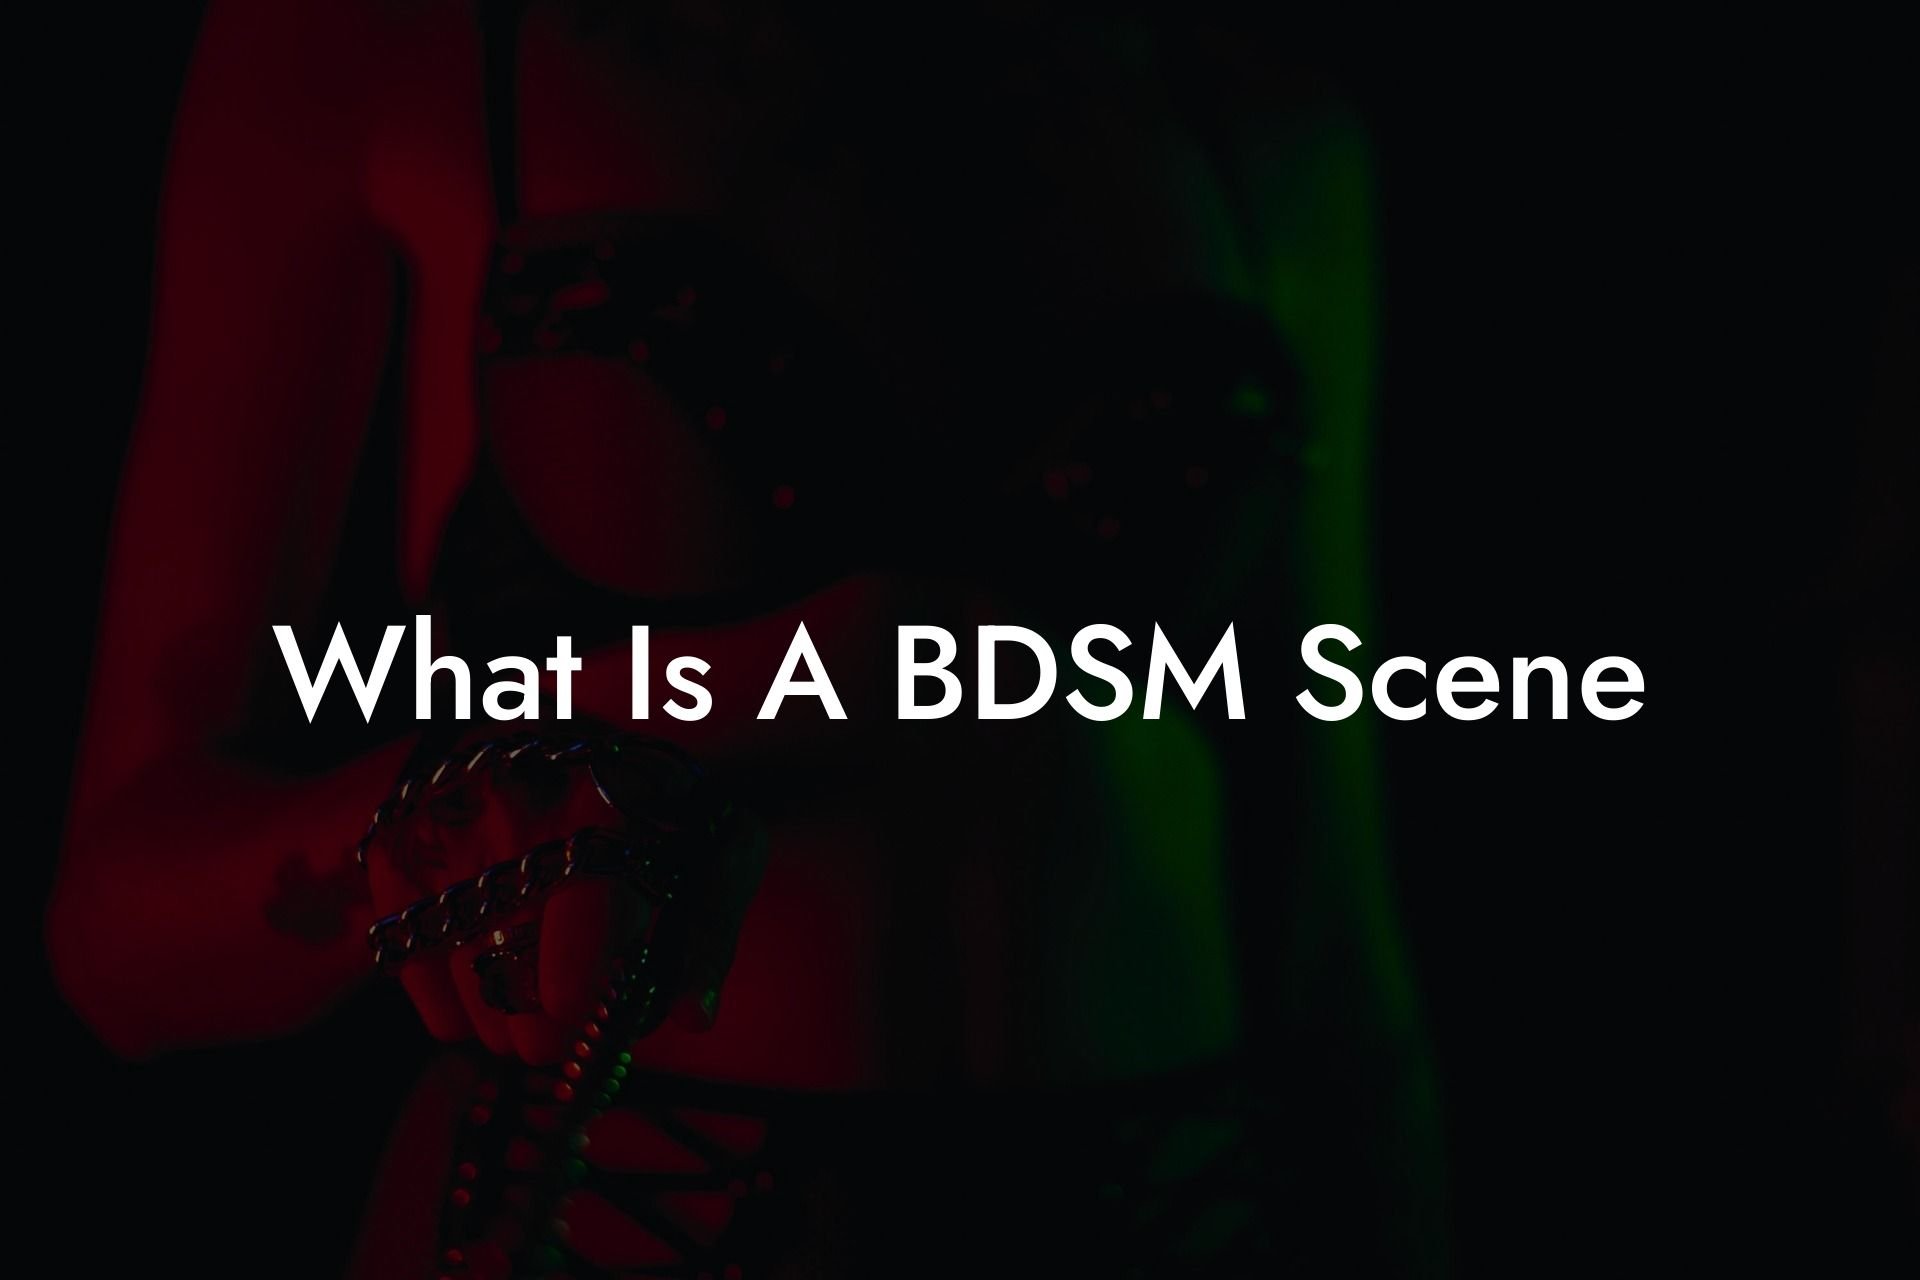 What Is A BDSM Scene